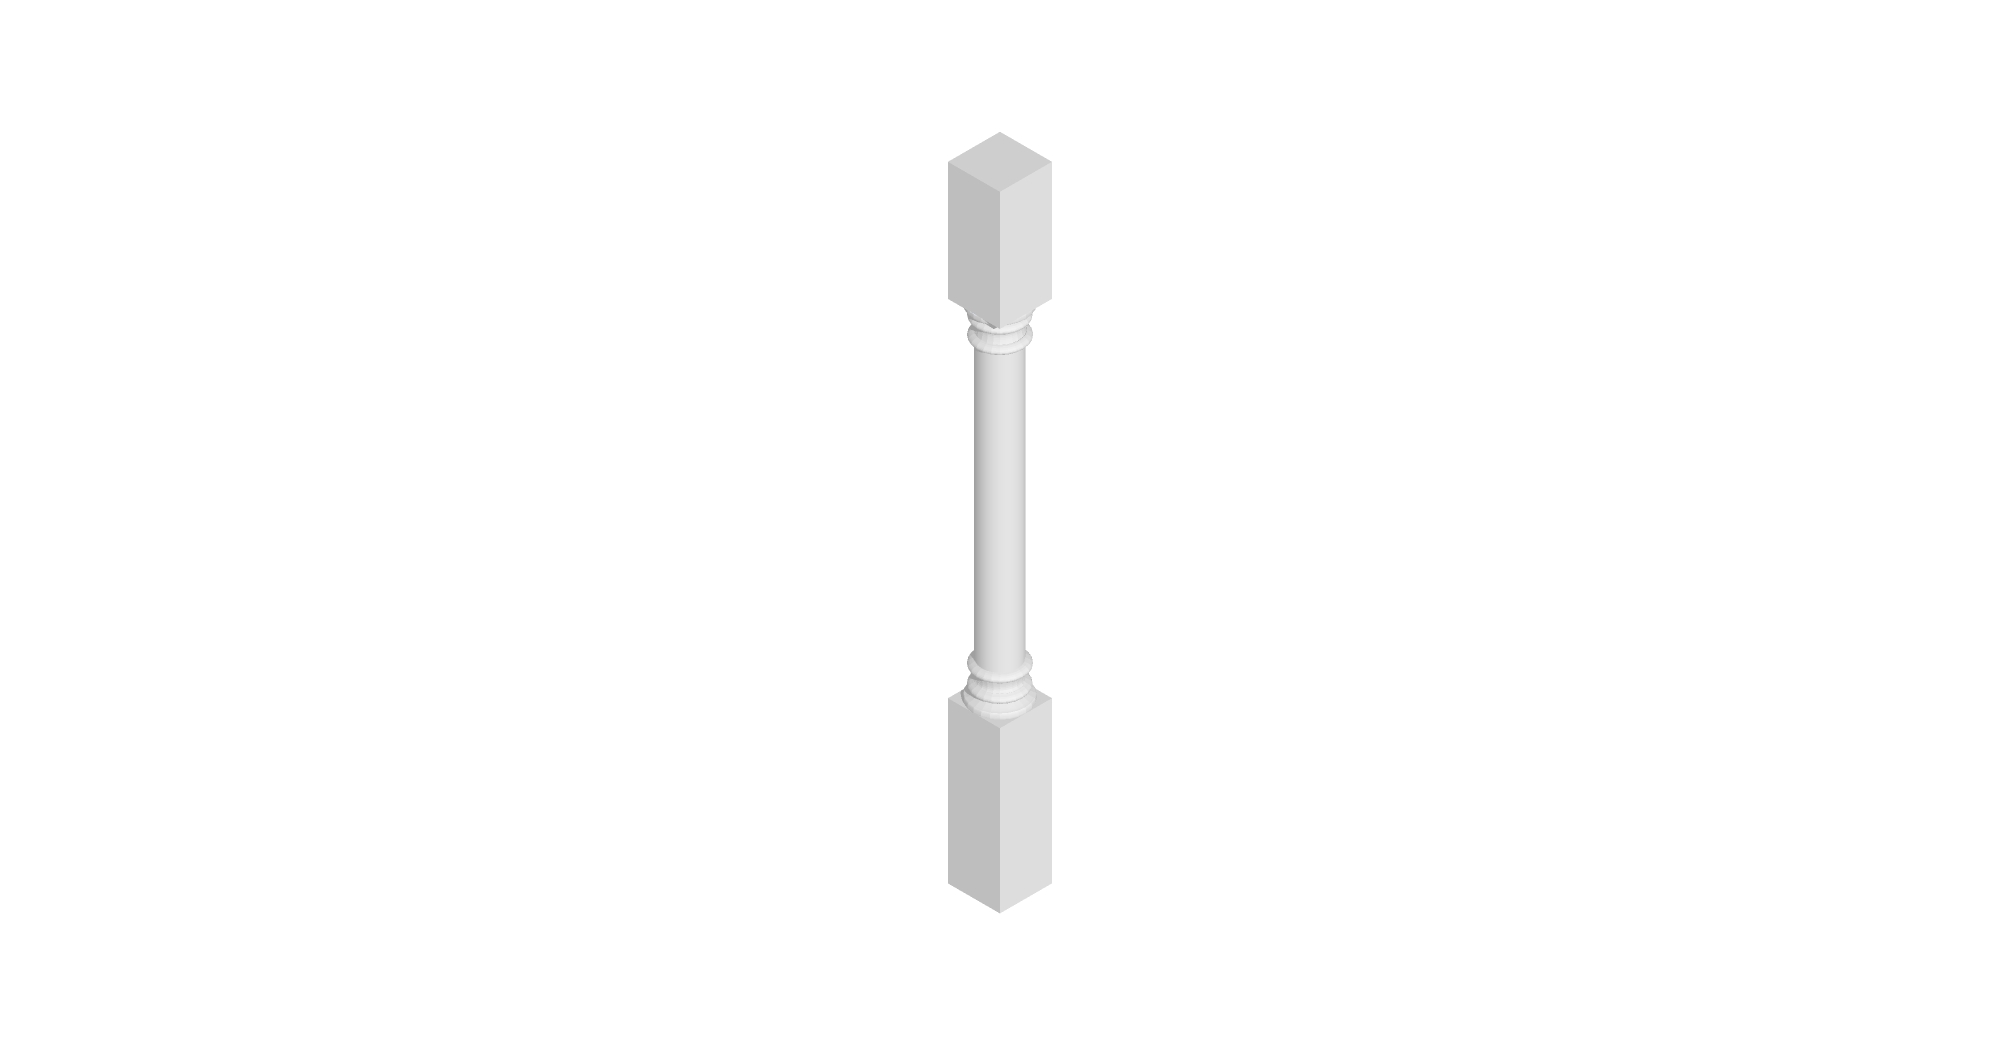 Benchpost Pilaster 900 X 75 X 75 - Wakefield Porcelain